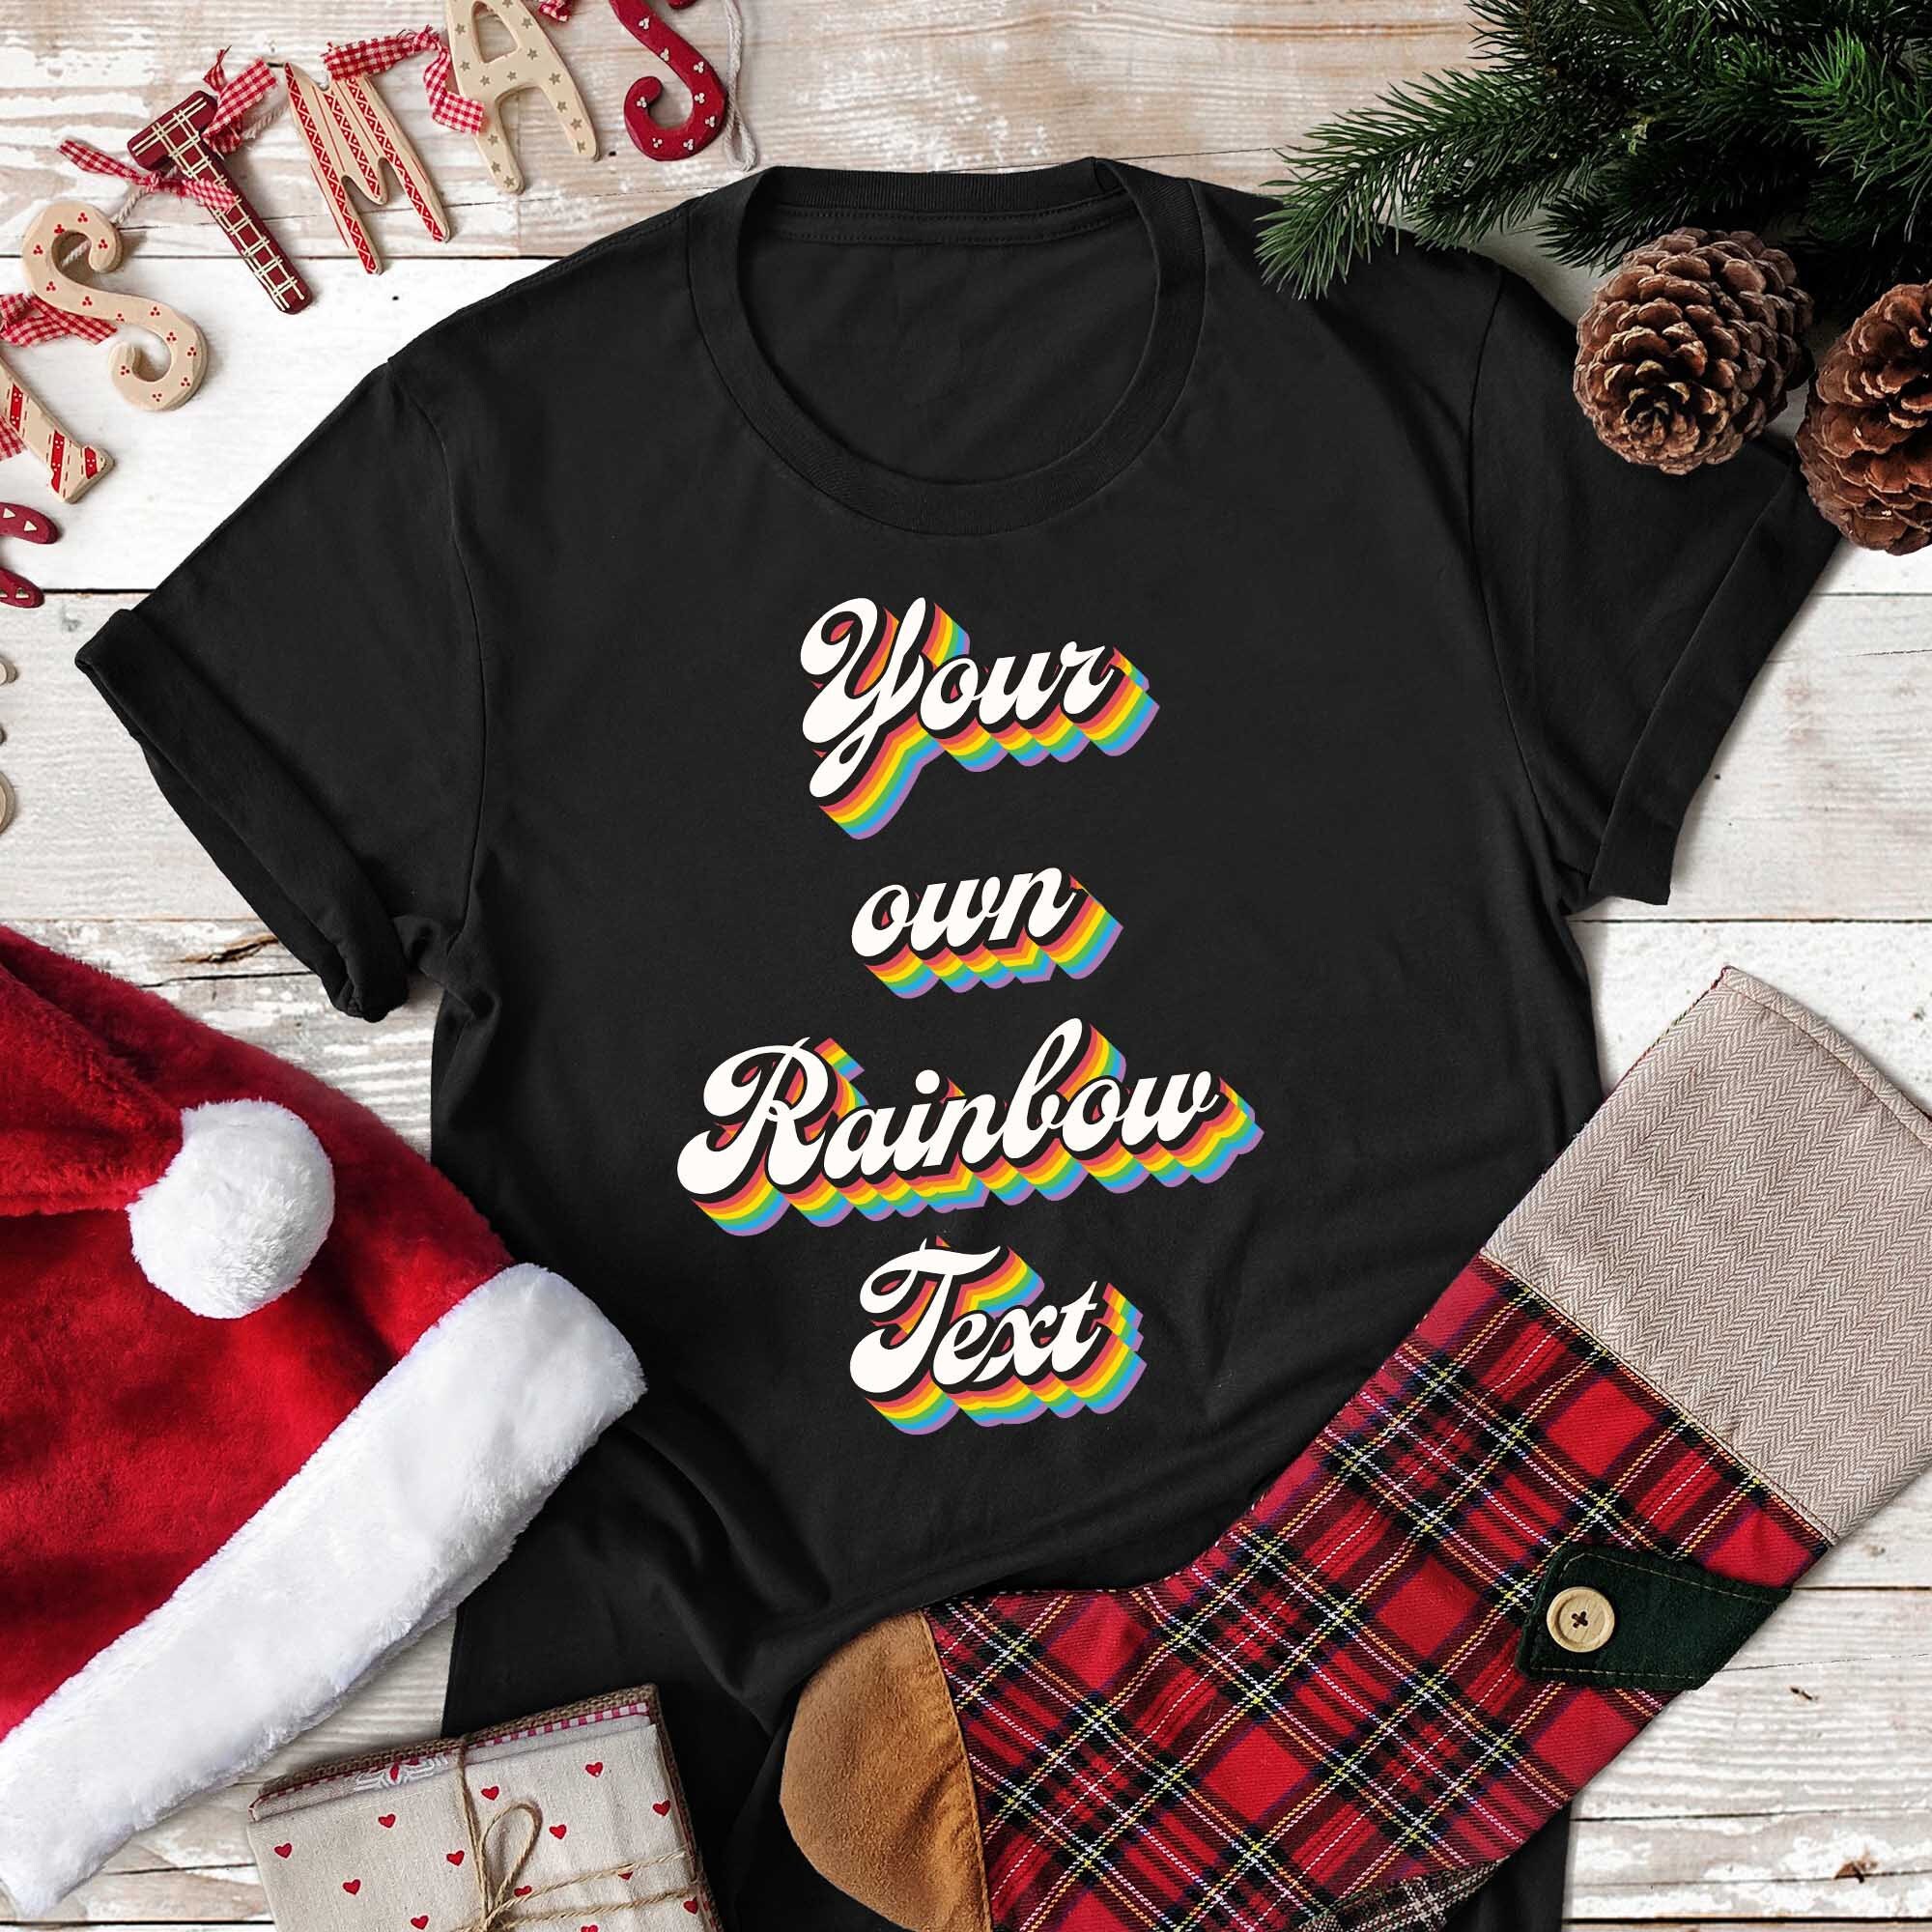 Discover Your Text Here, Rainbow Personalized Shirt, Gay Custom Tee, Design Your LGBTQ Tee, Lesbian Birthday Gift, Gay Pride, Gay Couple Matching Tee